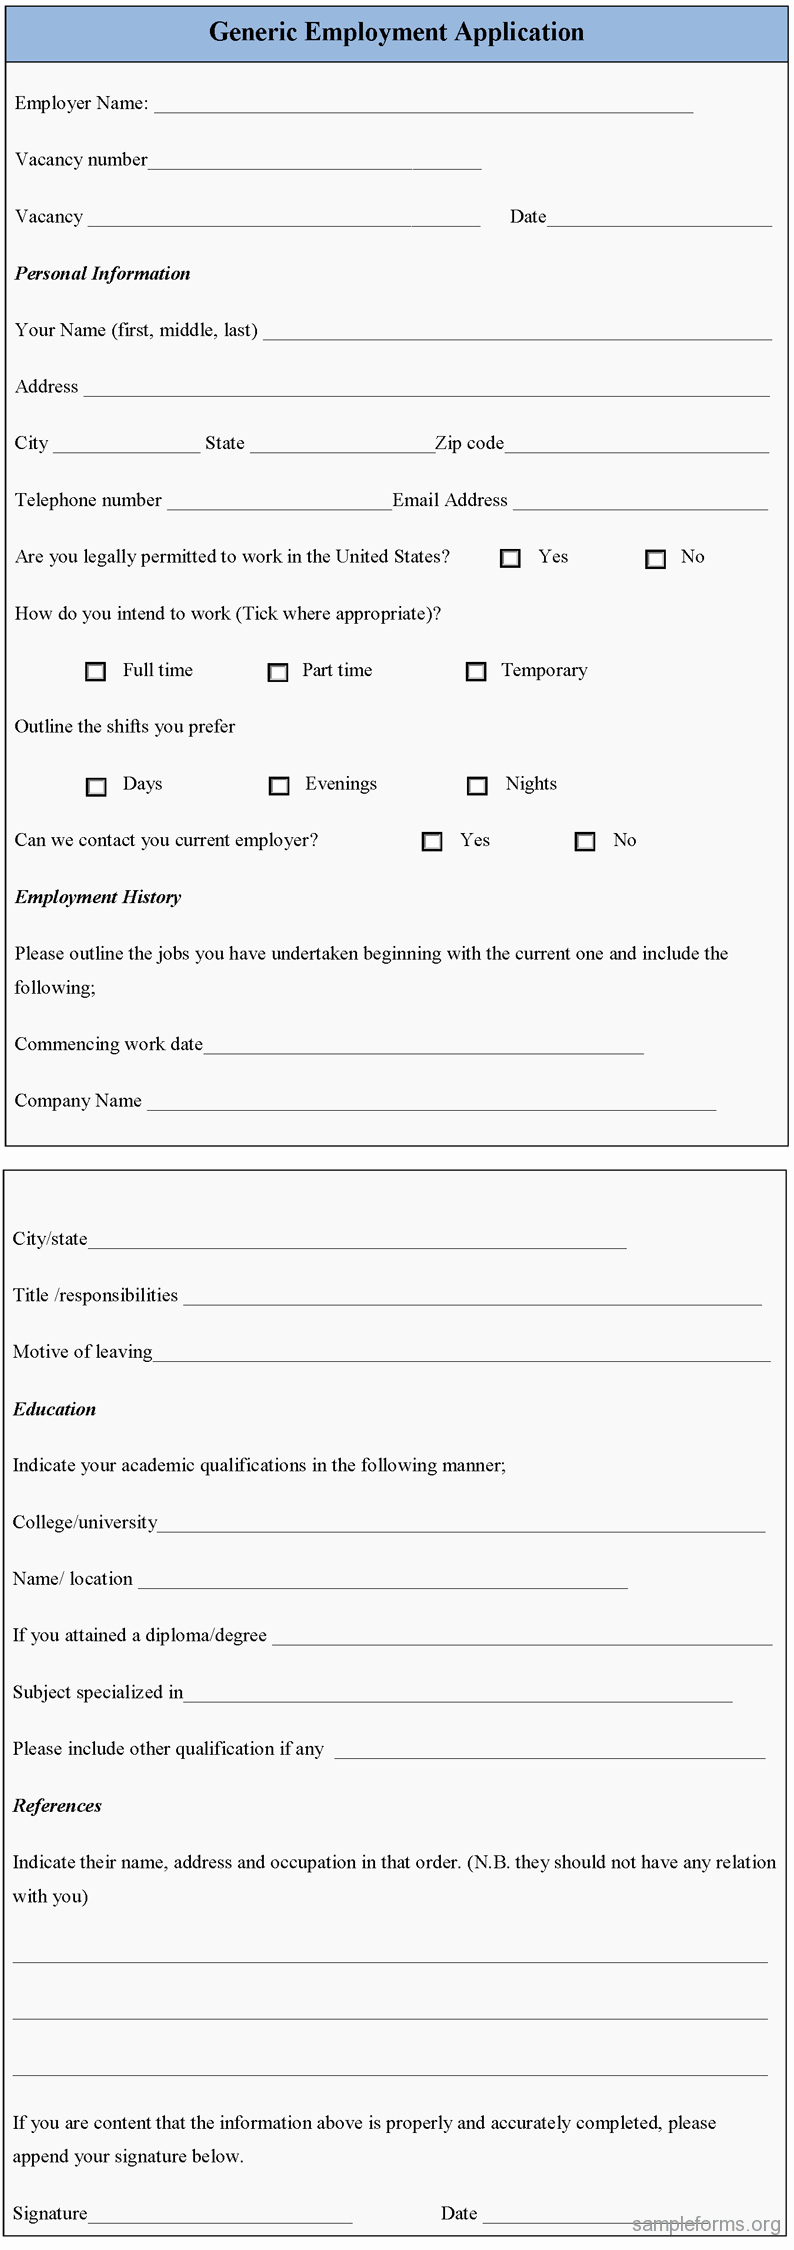 Generic Application for Employment form Awesome Generic Employment Application form Sample forms